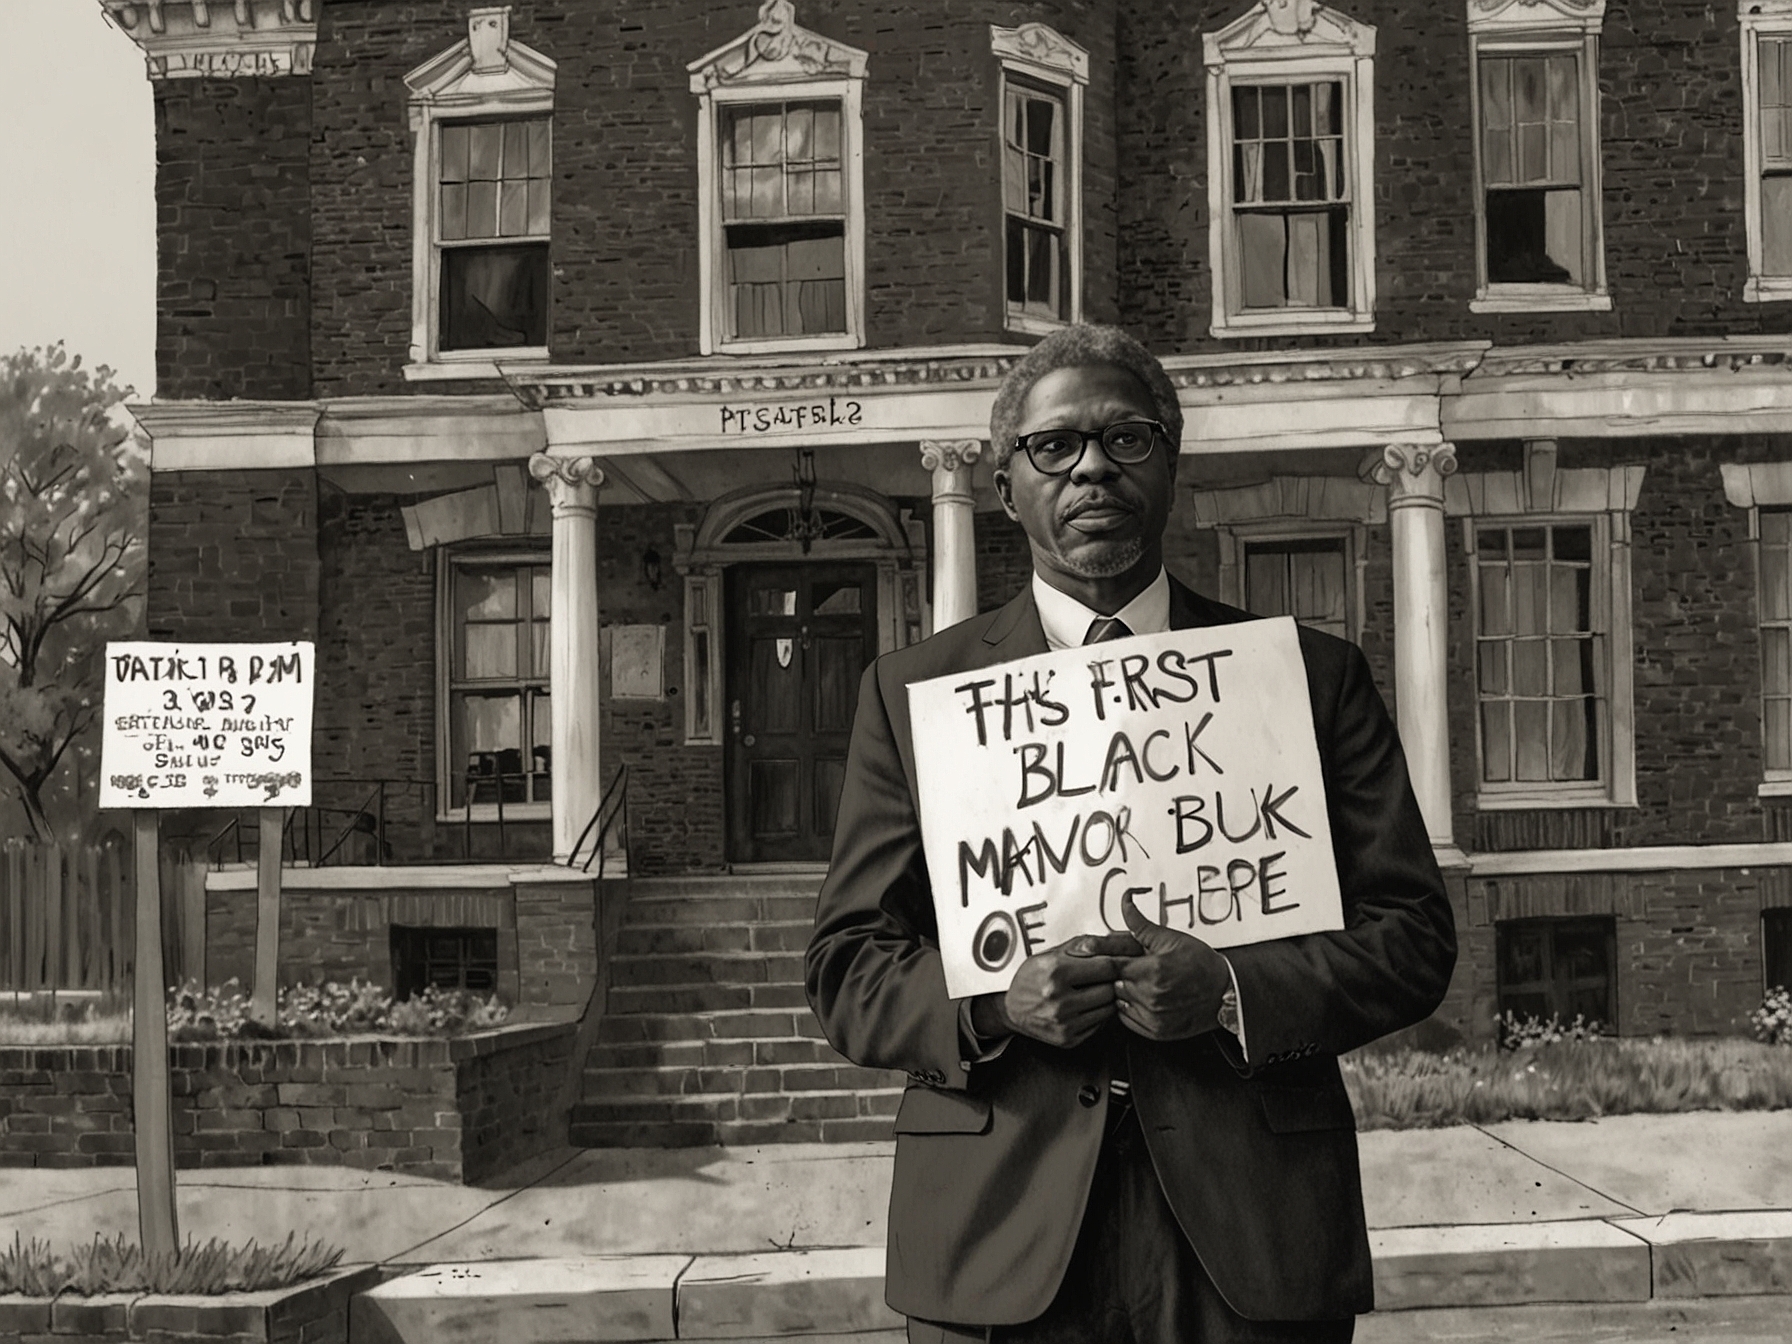 Patrick Braxton, holding a sign reading 'First Black Mayor of Newbern,' addresses the community in front of the town hall, symbolizing a restored sense of hope and leadership.